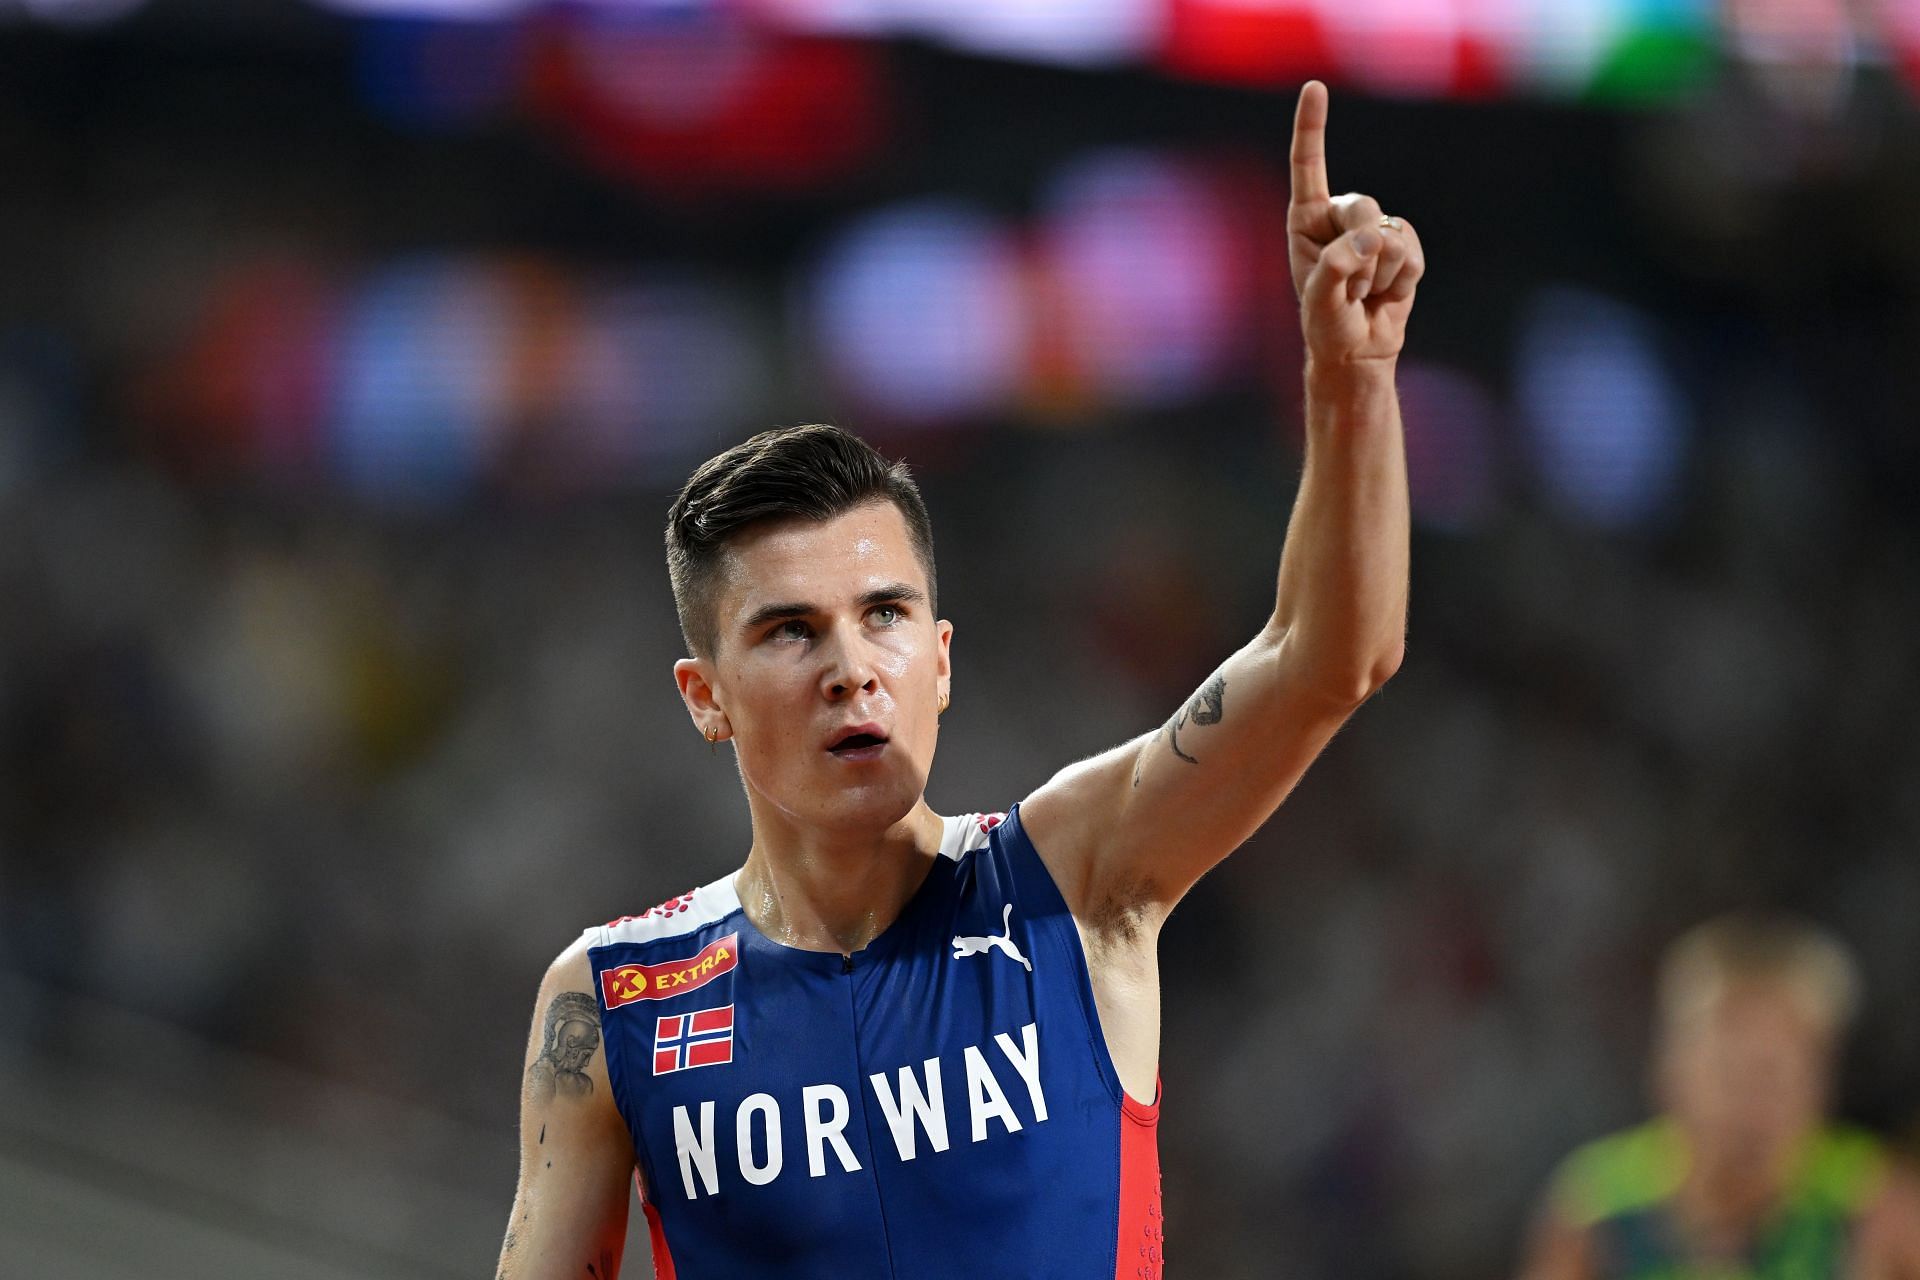 Jakob Ingebrigtsen aims for Olympic medals.